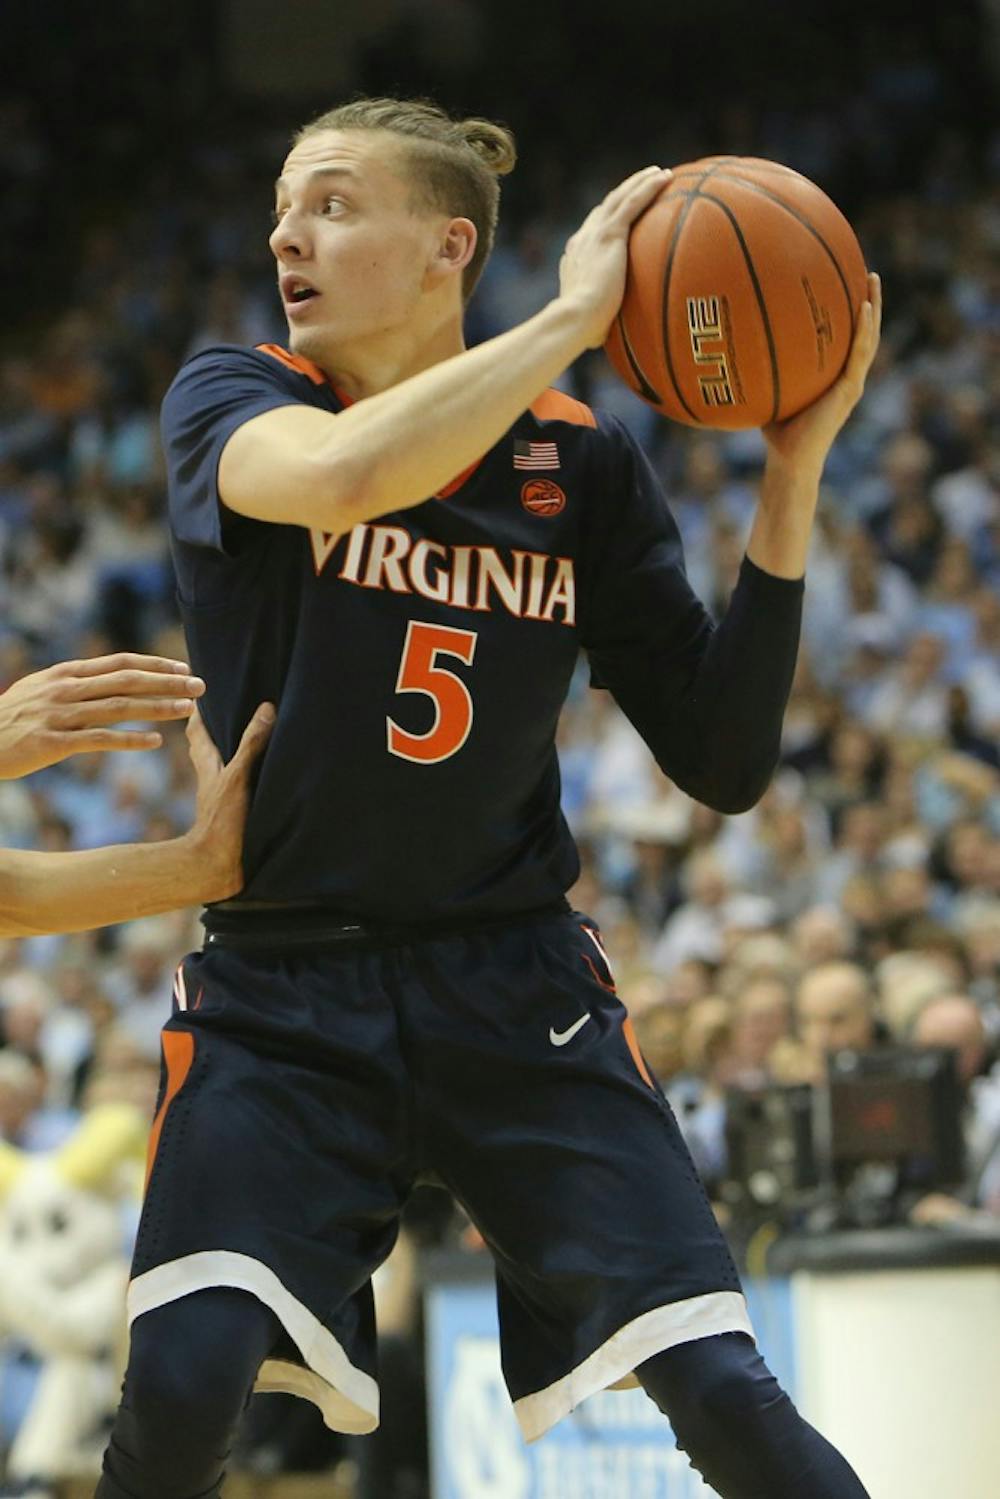 <p>Freshman guard Kyle Guy led Virginia in scoring with 19 points in win over N.C. State.&nbsp;</p>